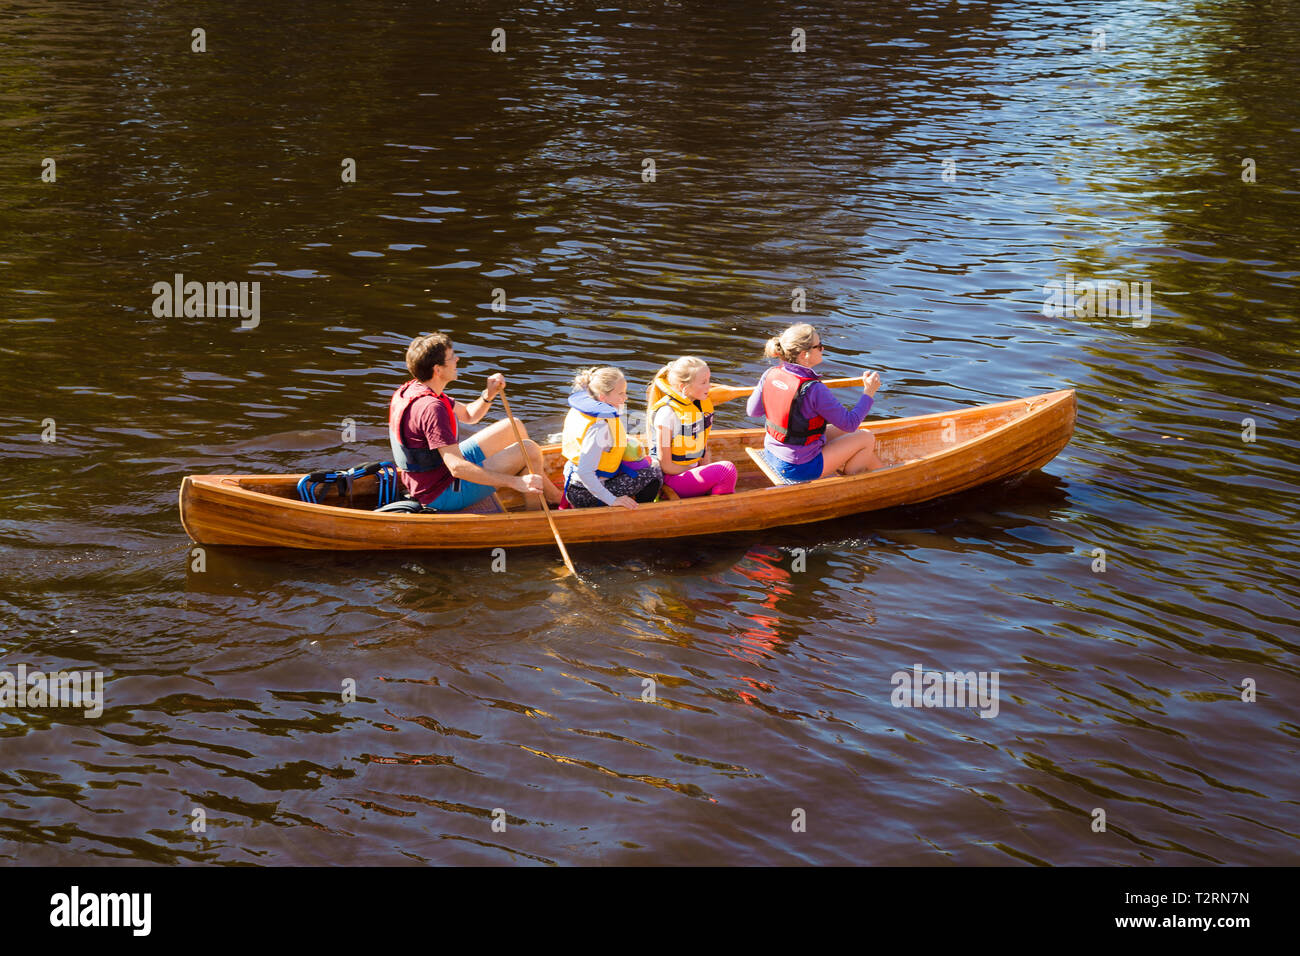 York, North Yorkshire. A family of canoeists on the River Ouse in York. Stock Photo